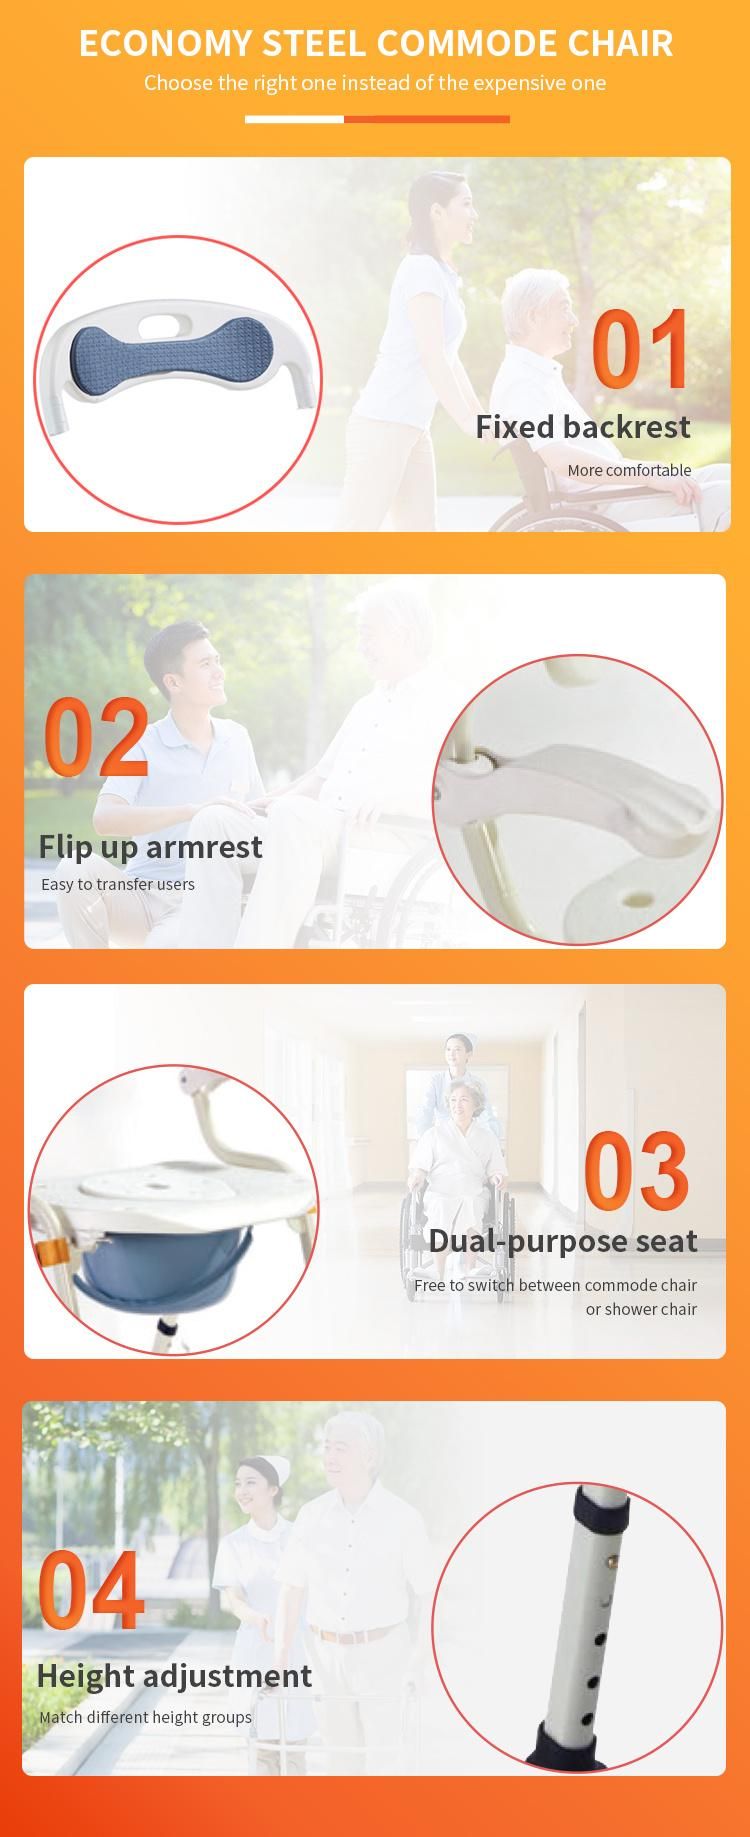 Toilet Seat with Soft EVA Back Cushion 3 in 1 Shower Chair Powder Coating Surface Height Adjust Lightweight Steel Commode Chair